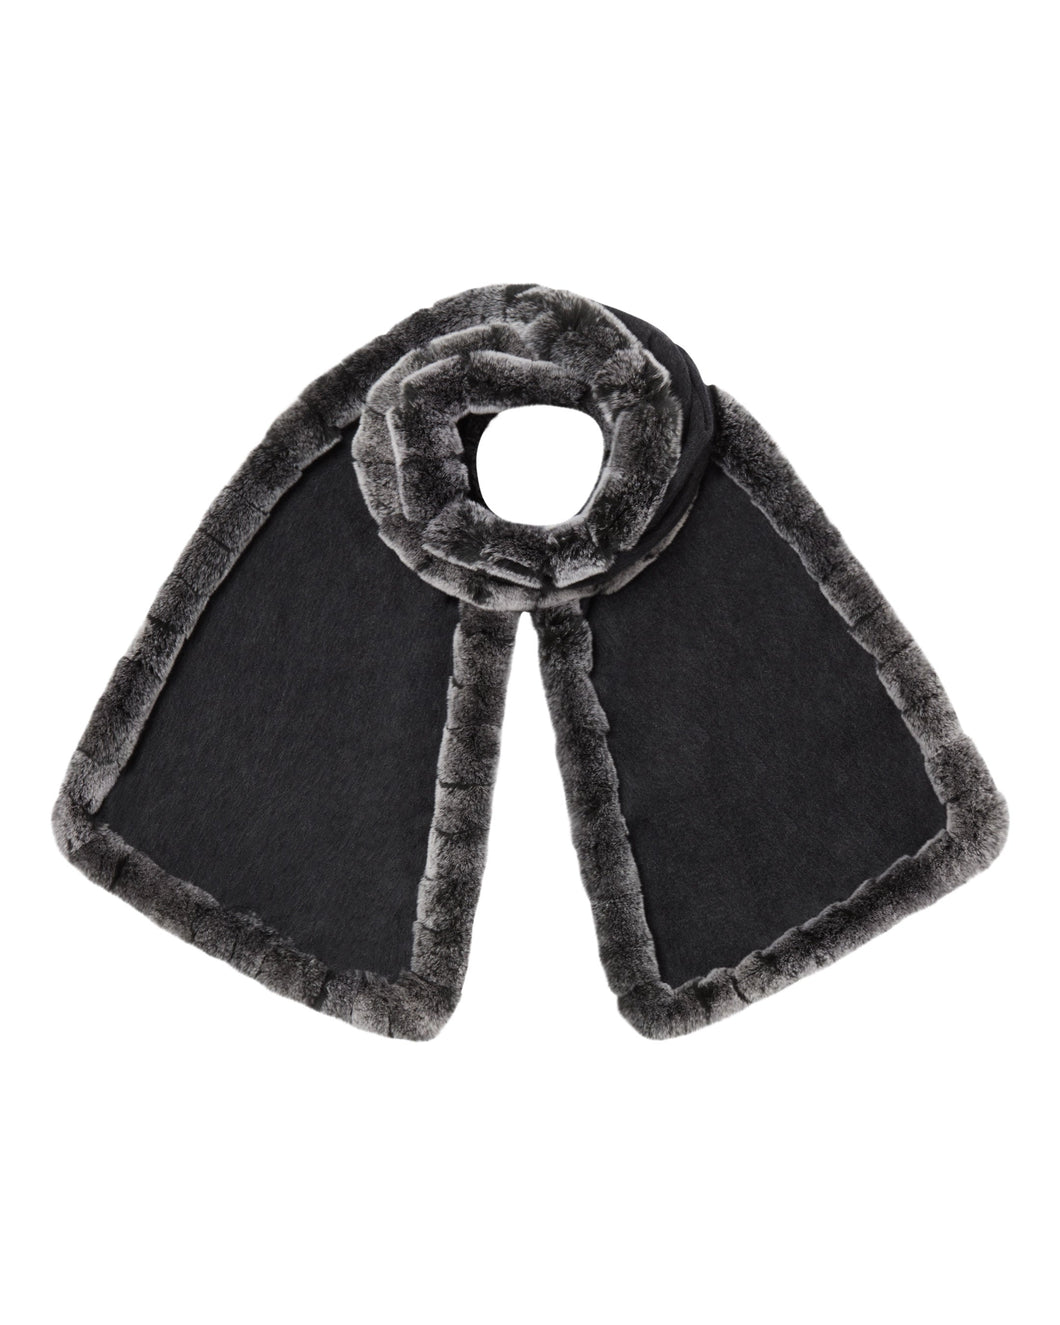 N.Peal Women's Cashmere Scarf With Fur Trim Dark Charcoal Grey